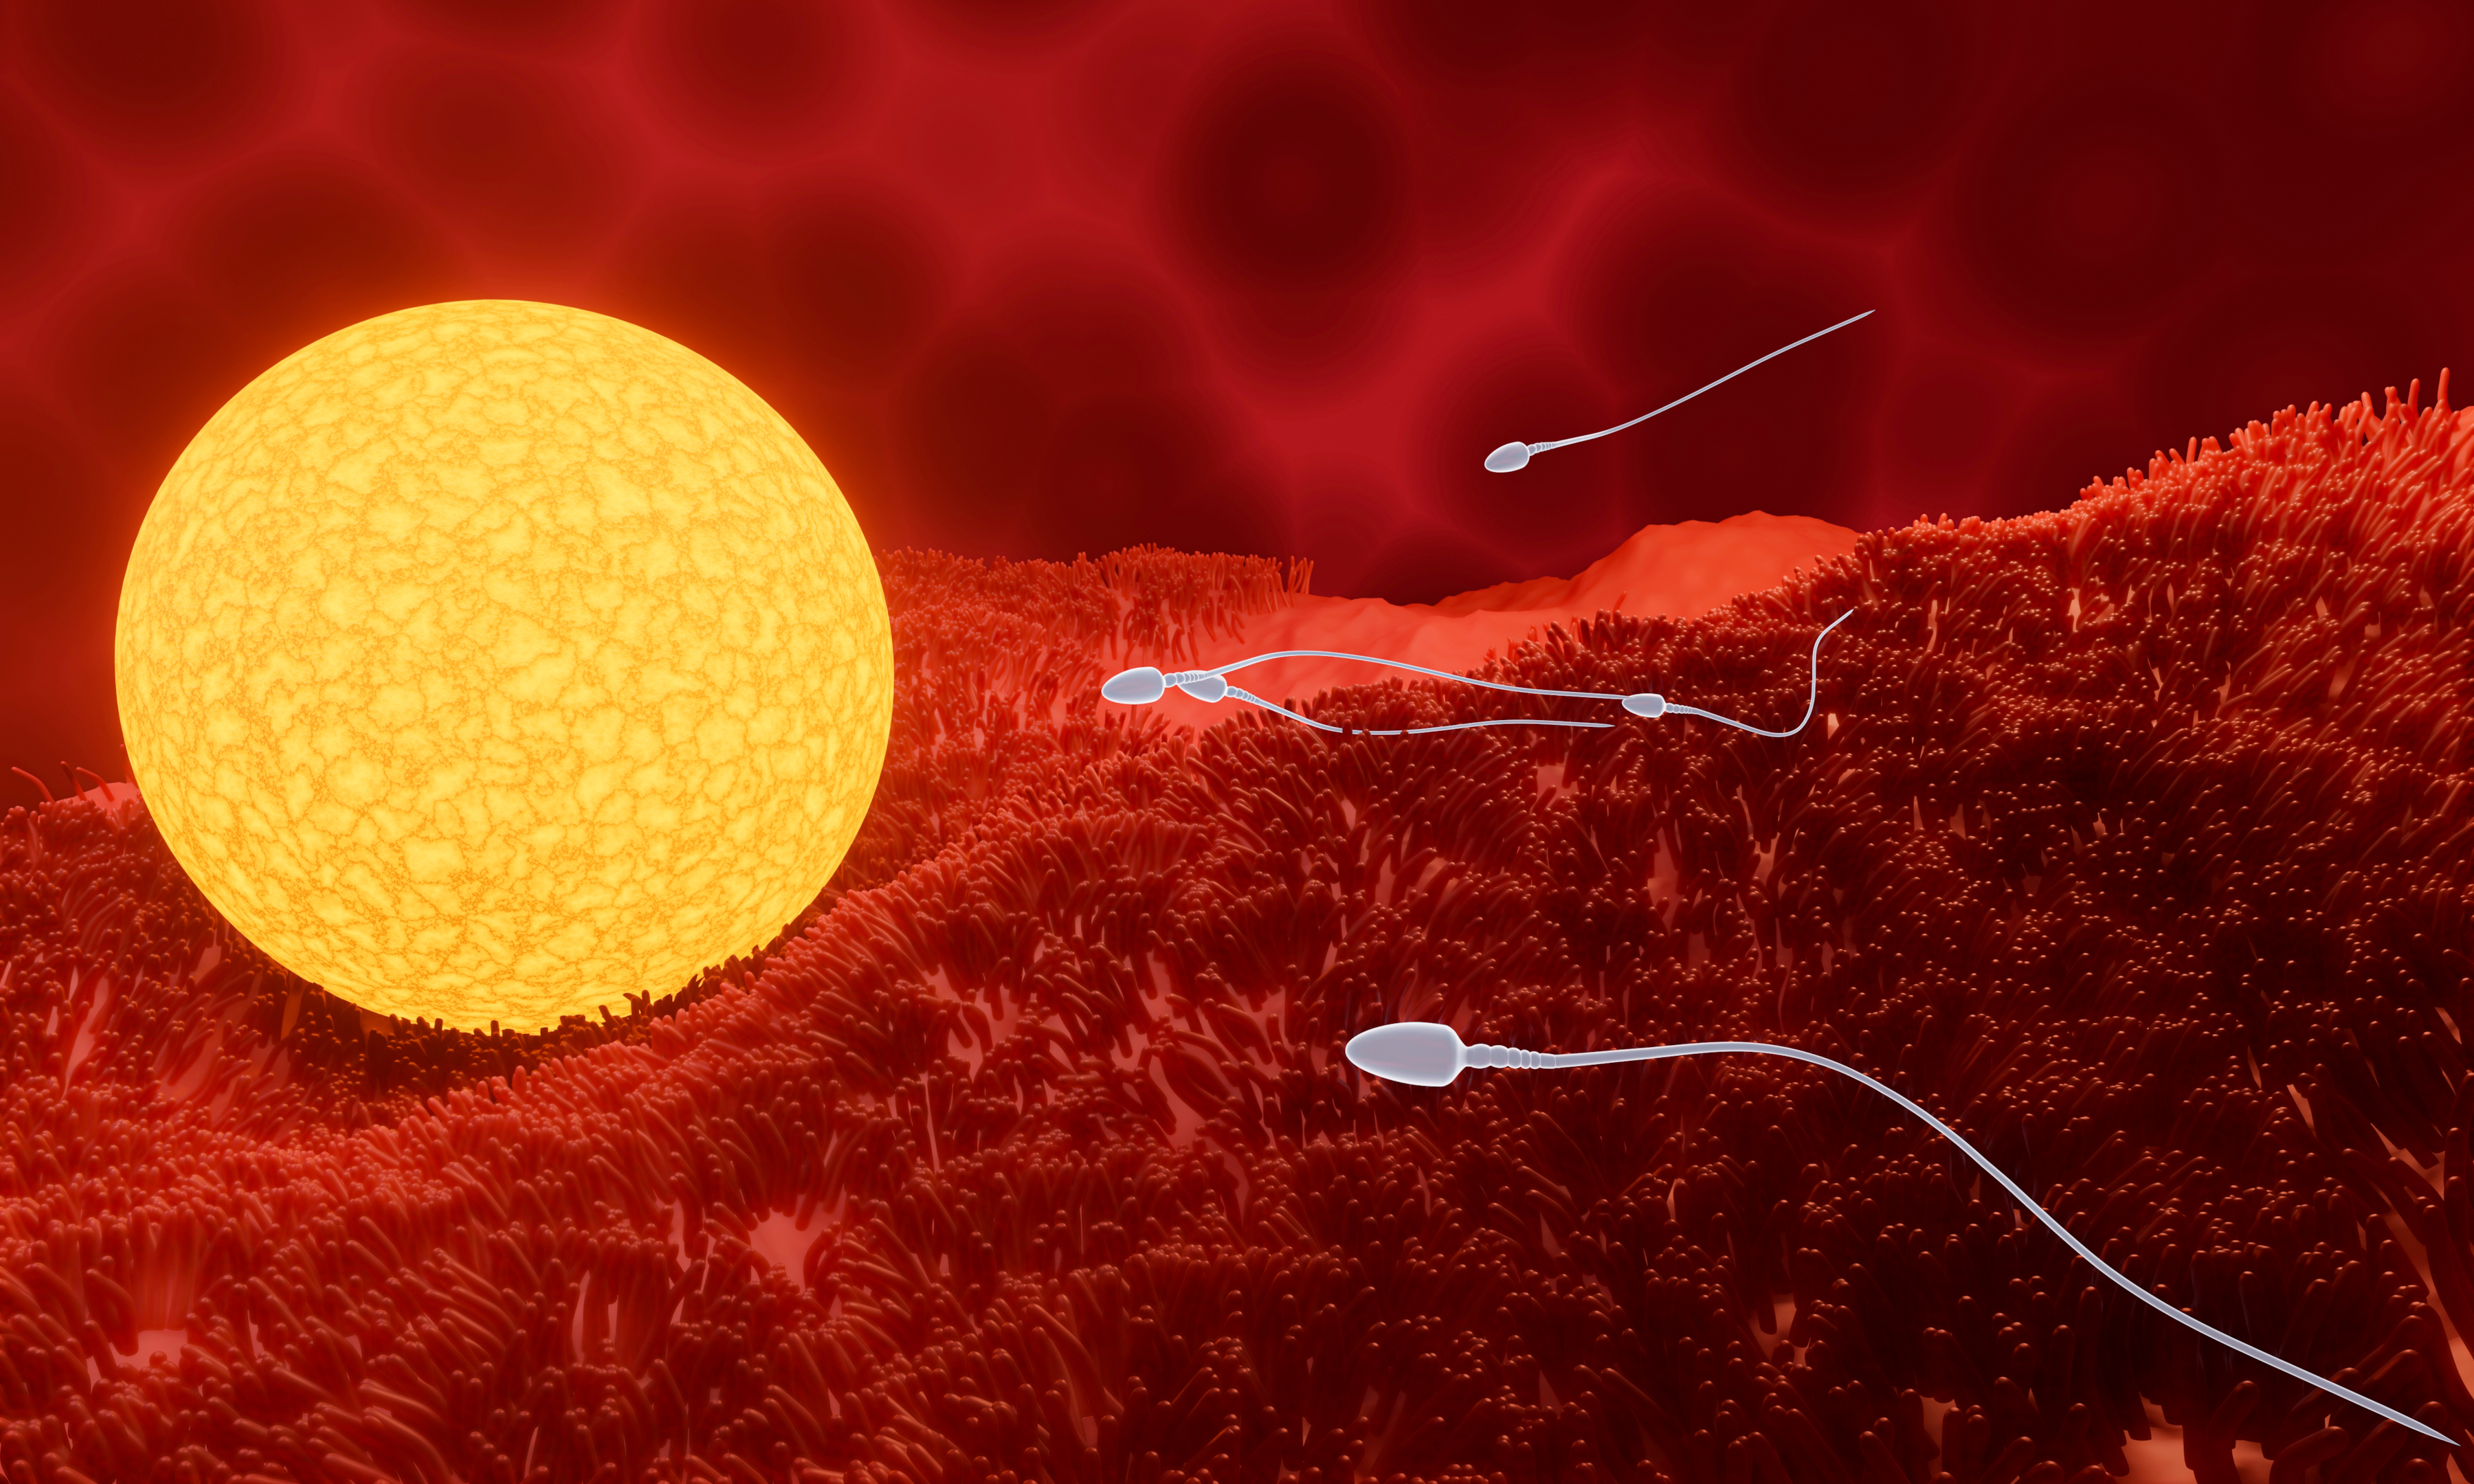 The sperm travelling towards the egg can irritate the uterus.